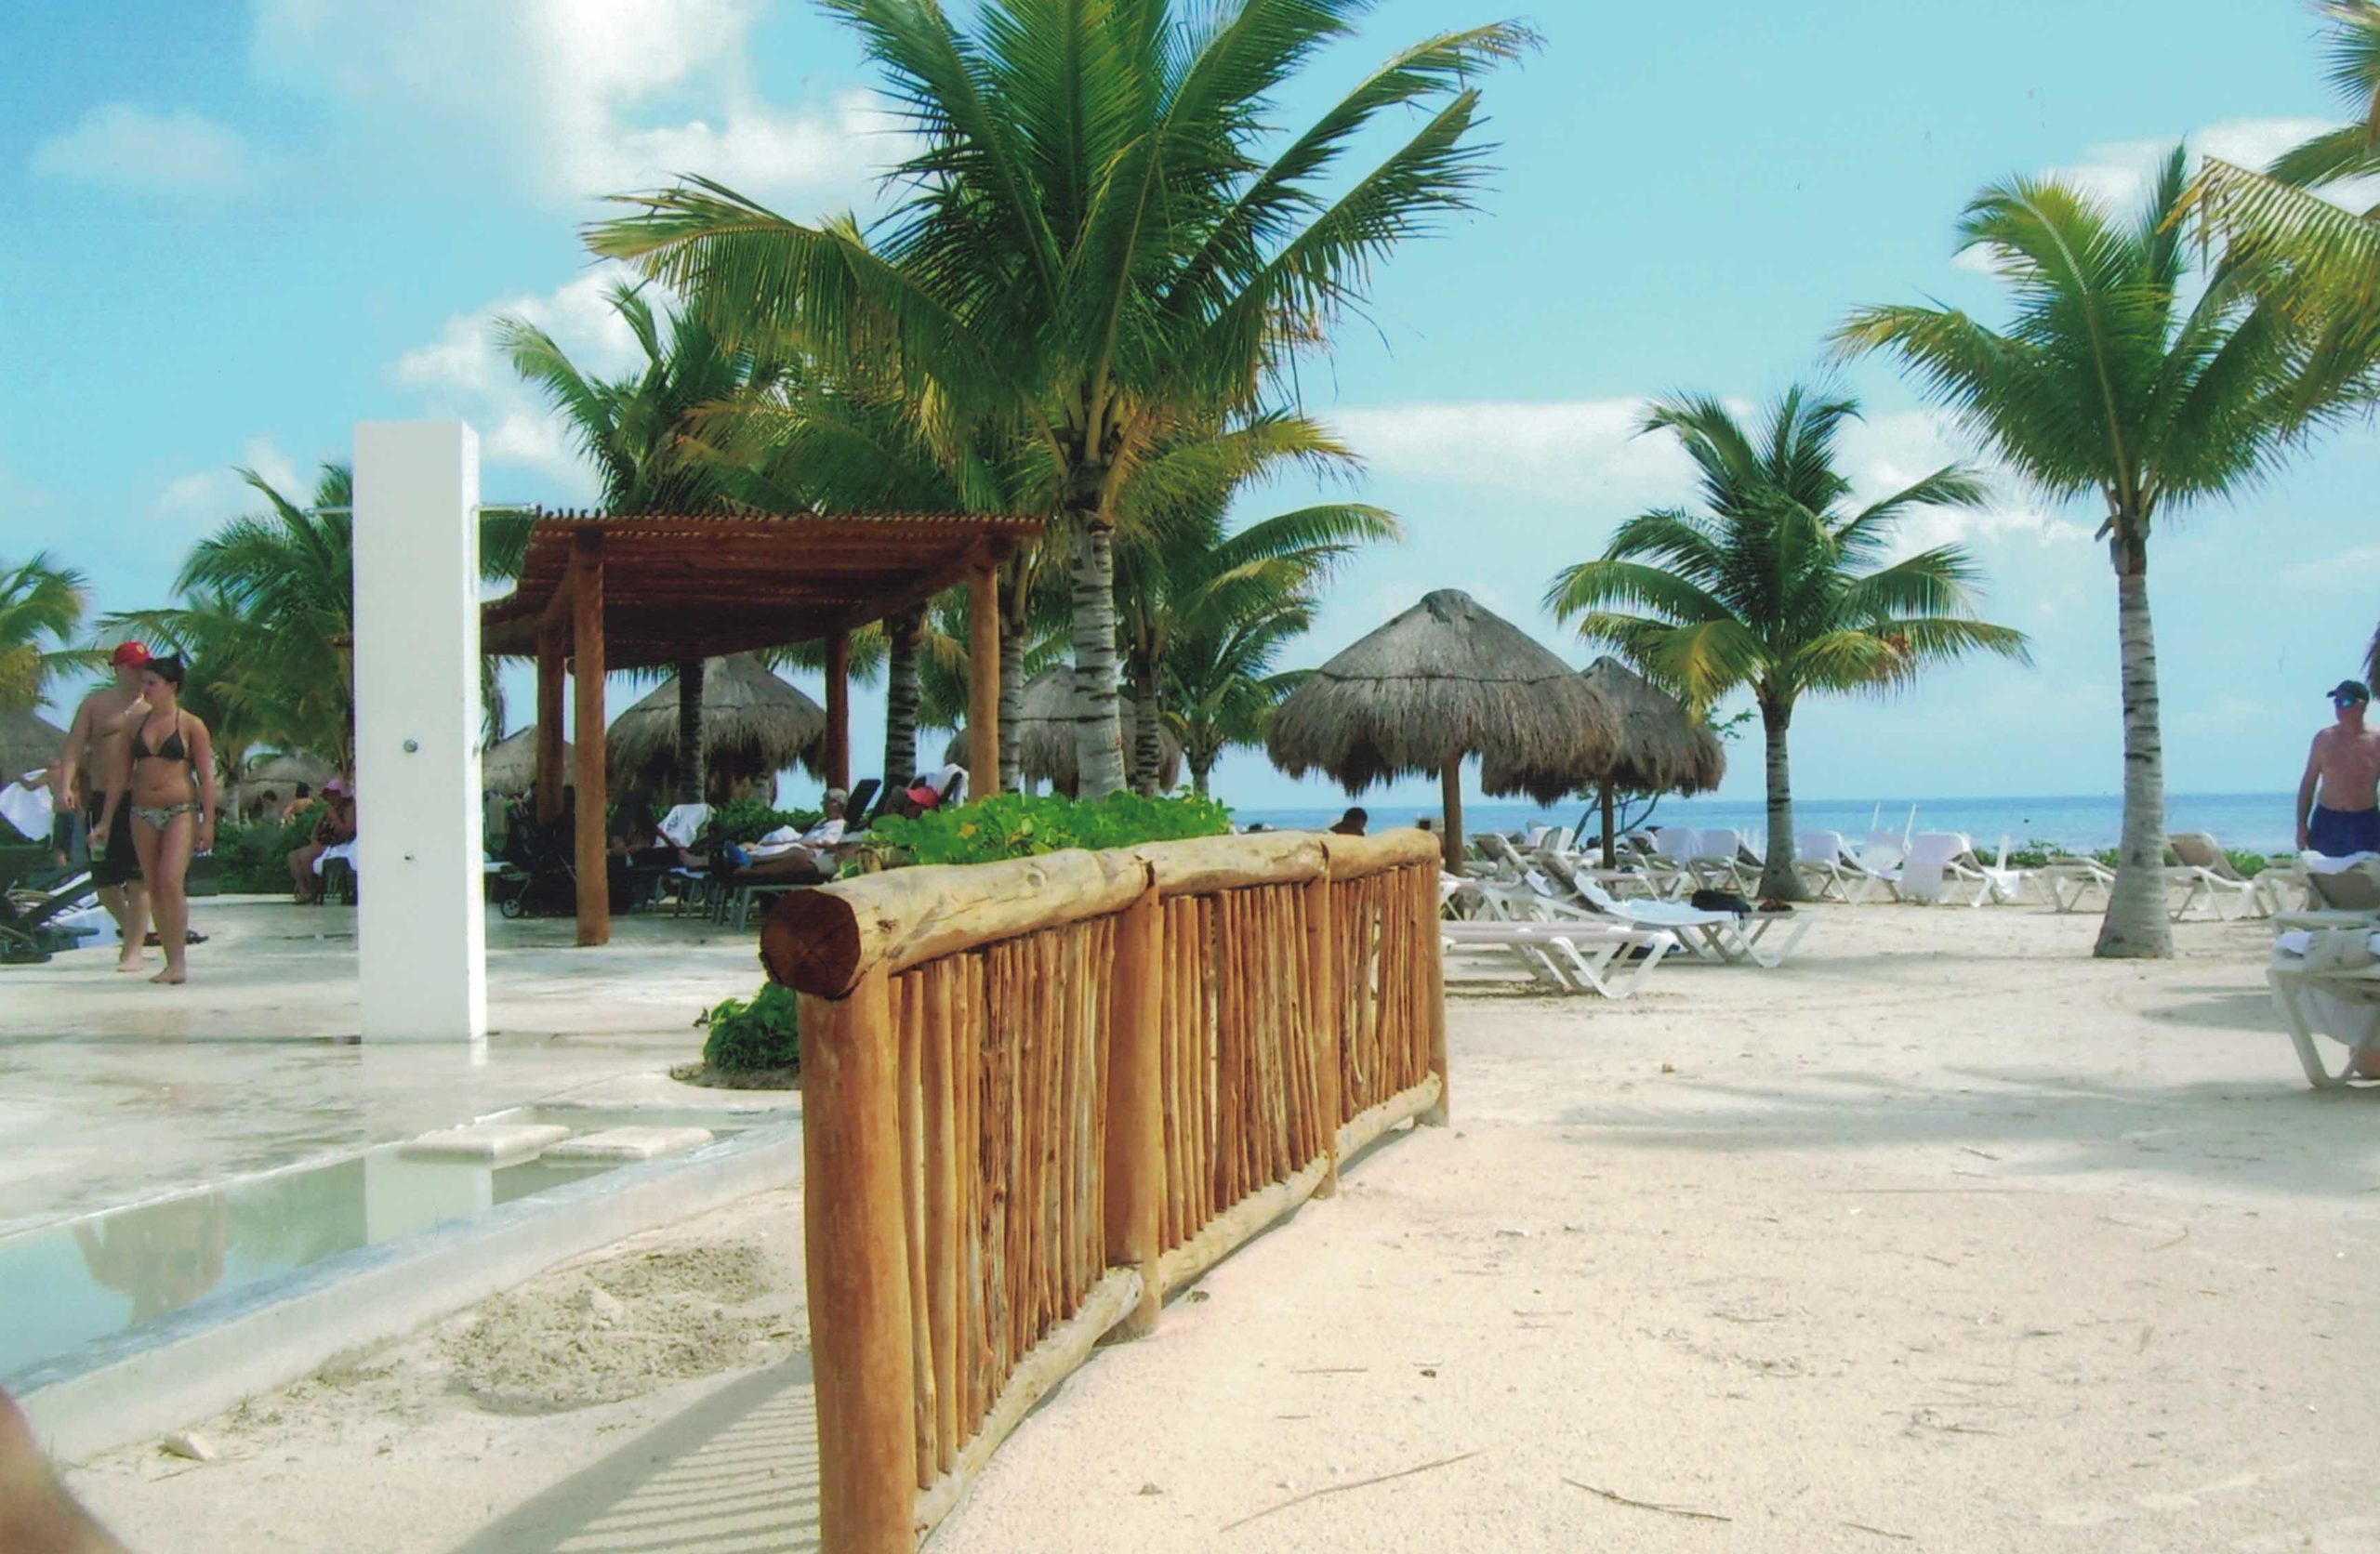 Riviera Maya vacation tips - when to wear water shoes